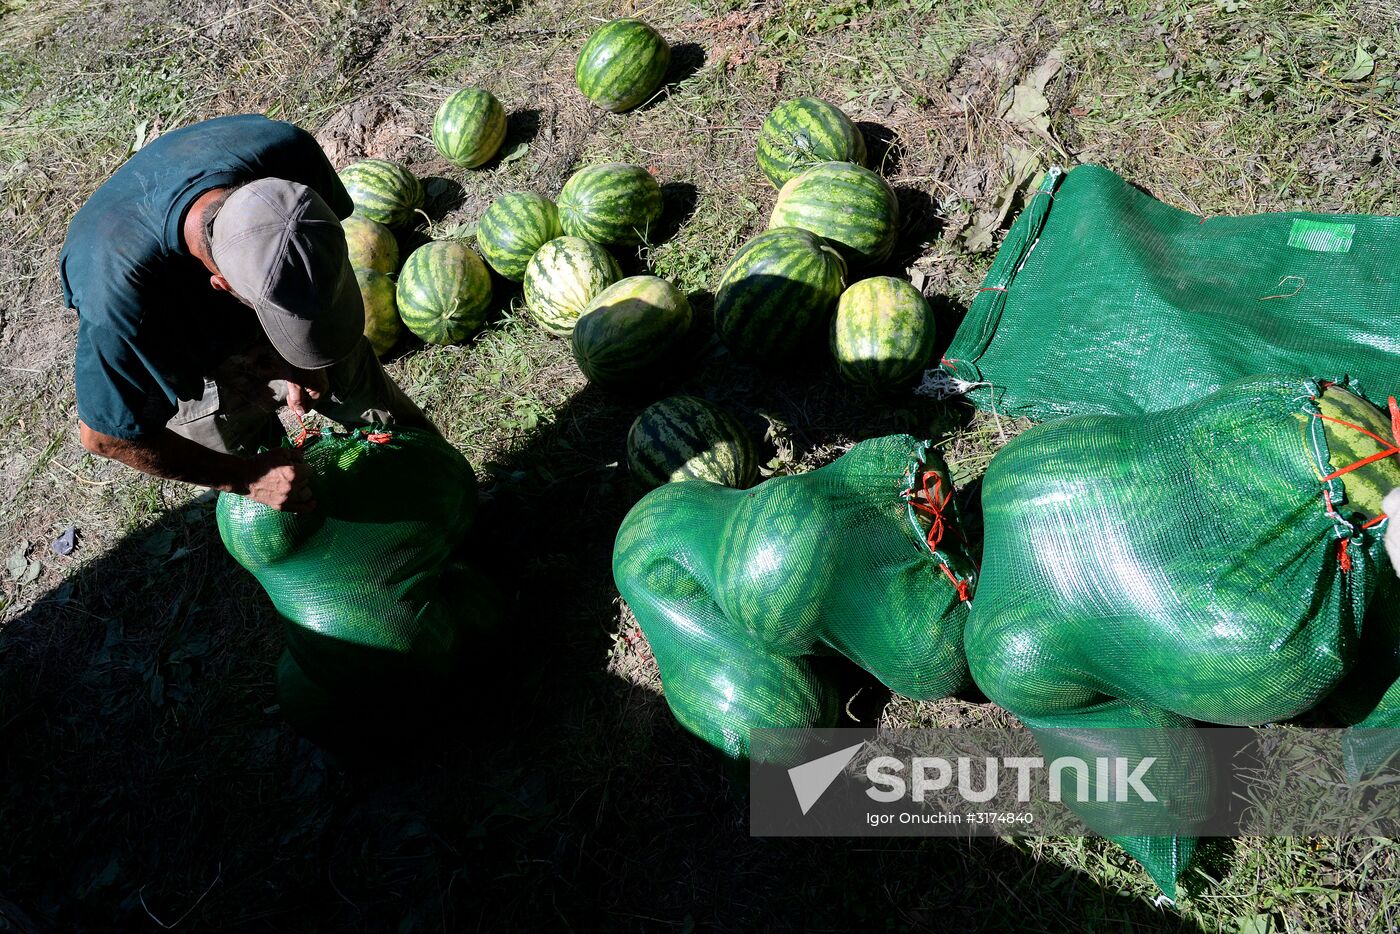 Growing and picking watermelons in Khabarovsk Territory